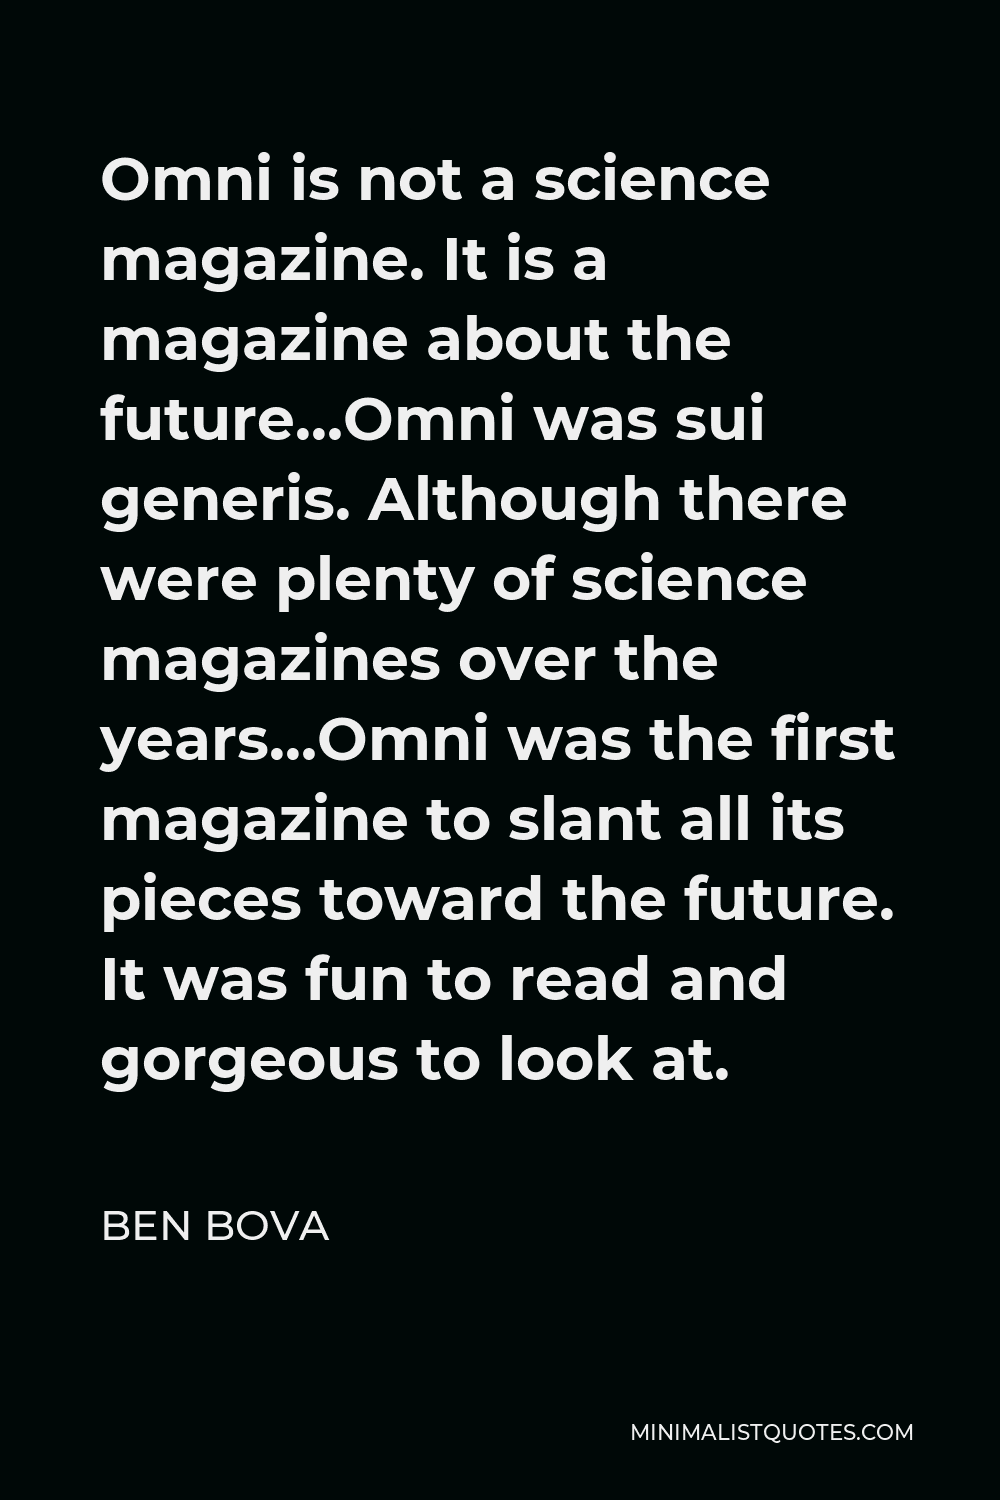 Ben Bova Quote - Omni is not a science magazine. It is a magazine about the future…Omni was sui generis. Although there were plenty of science magazines over the years…Omni was the first magazine to slant all its pieces toward the future. It was fun to read and gorgeous to look at.